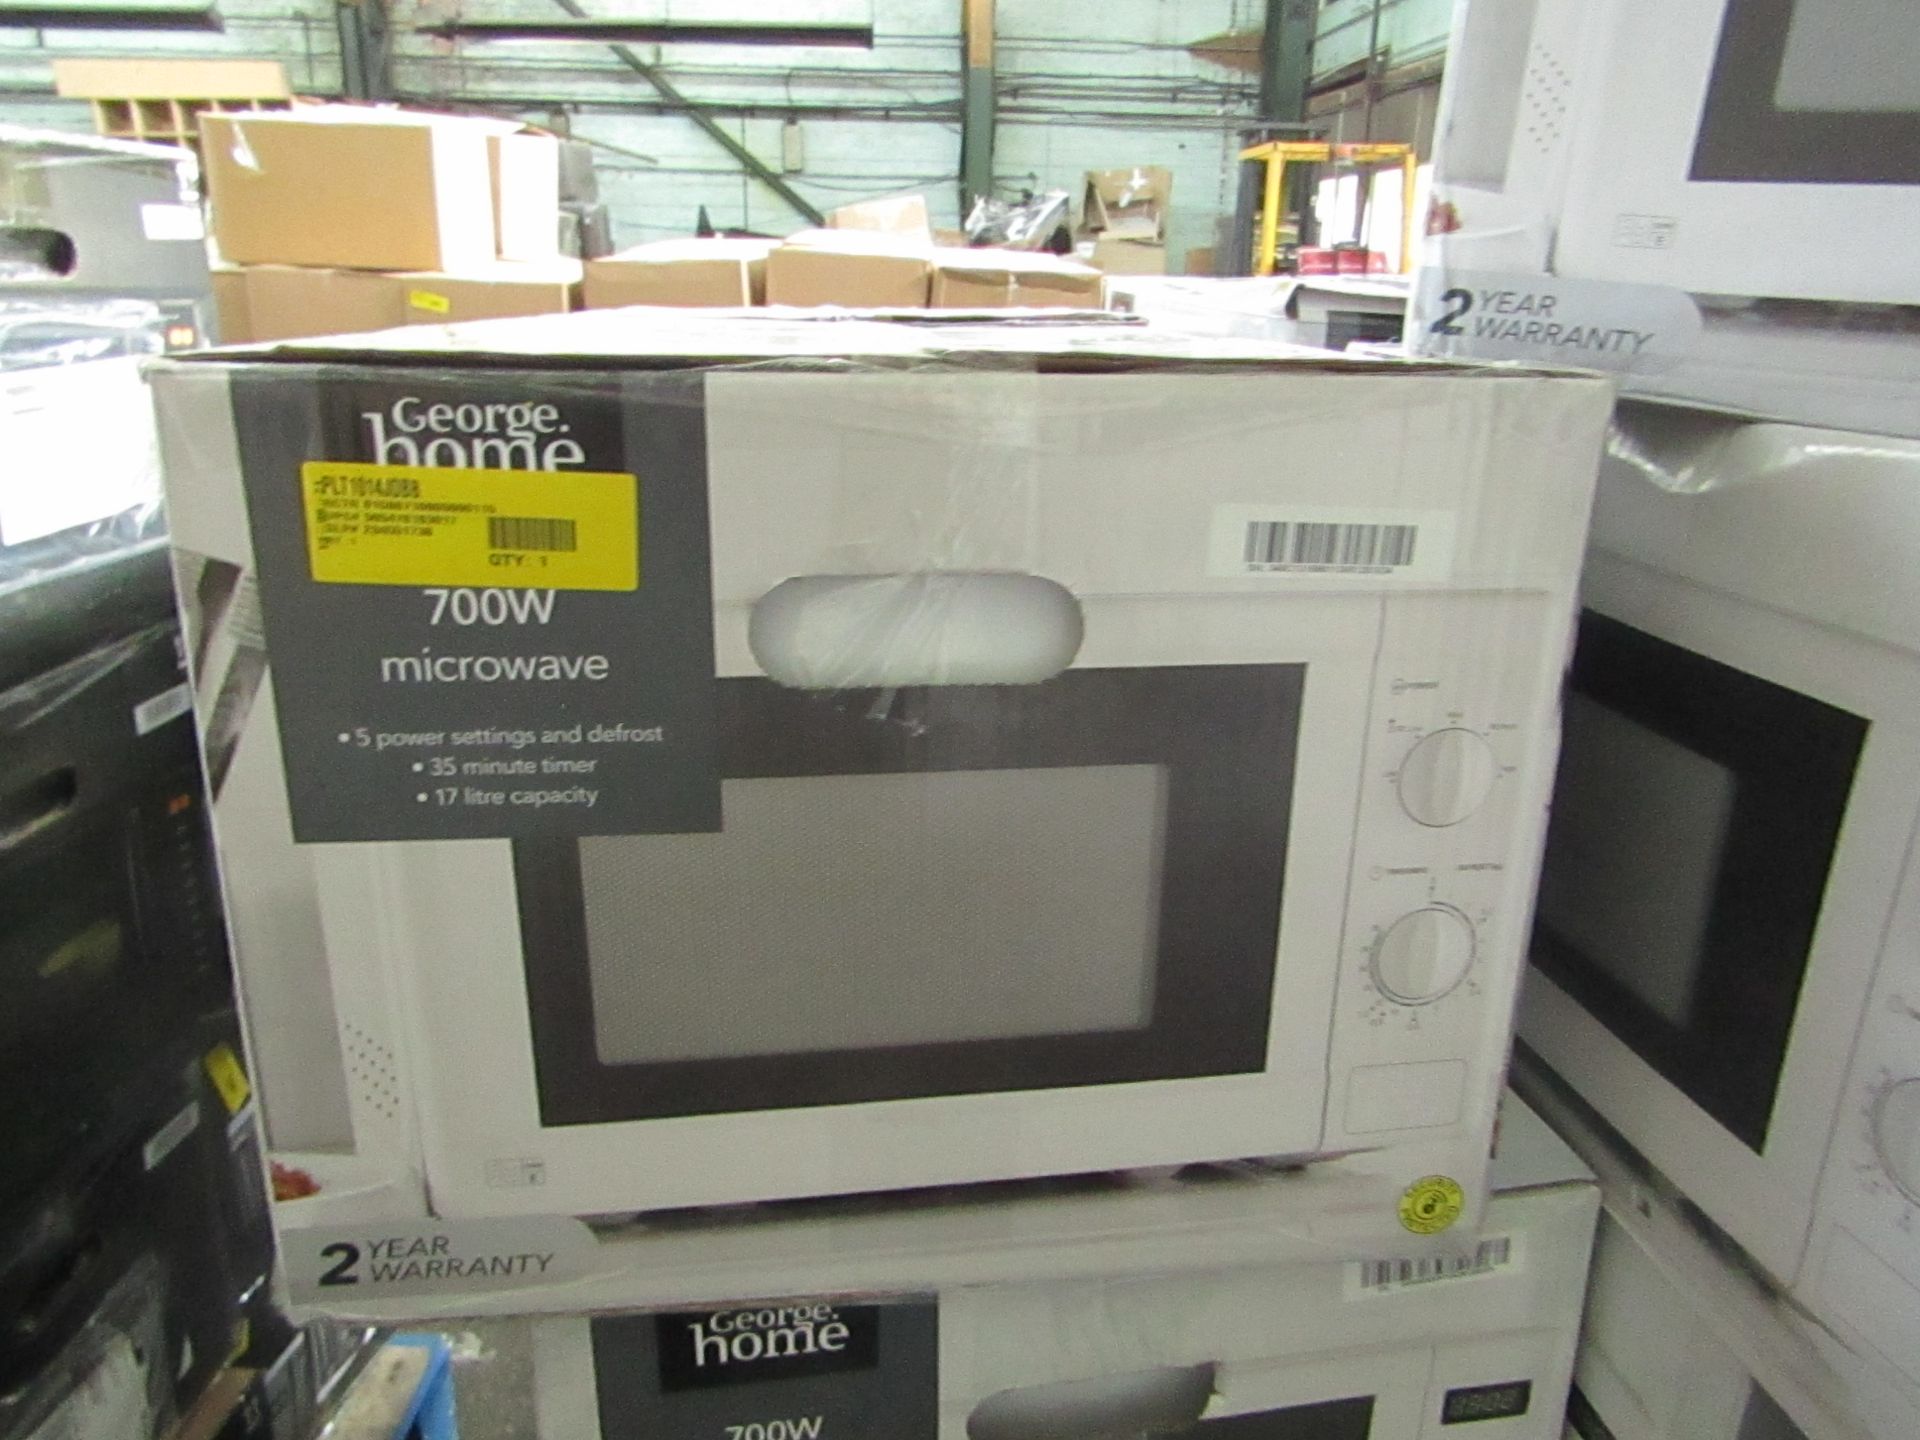 5x 700w Manual Microwave Ovens - White - Unchecked & Boxed - RRP £40 - Total lot RRP £200 - Load Ref